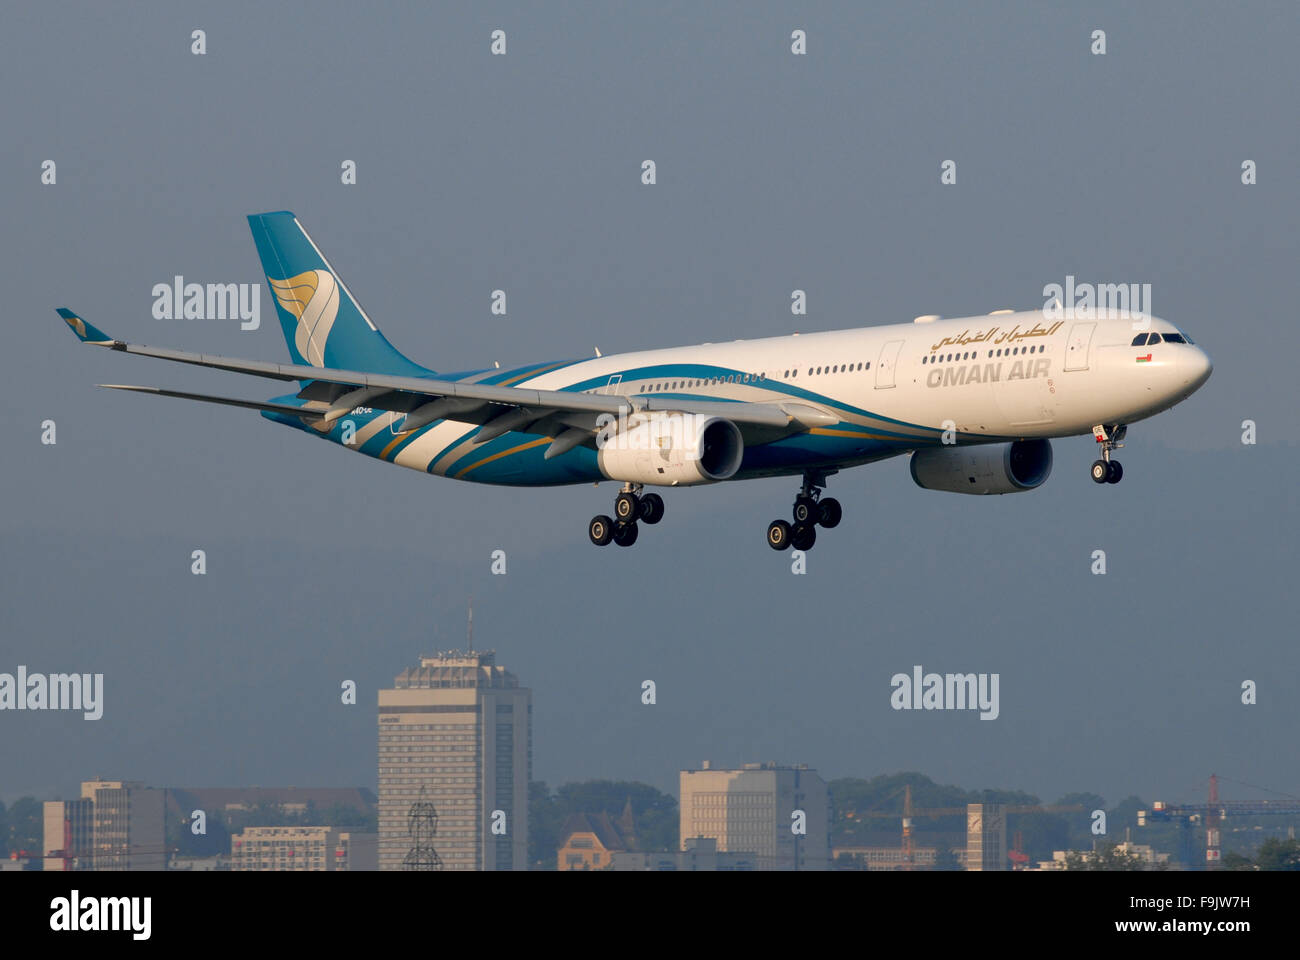 Oman Air Airbus A330-300 landing in Zurich Stock Photo - Alamy